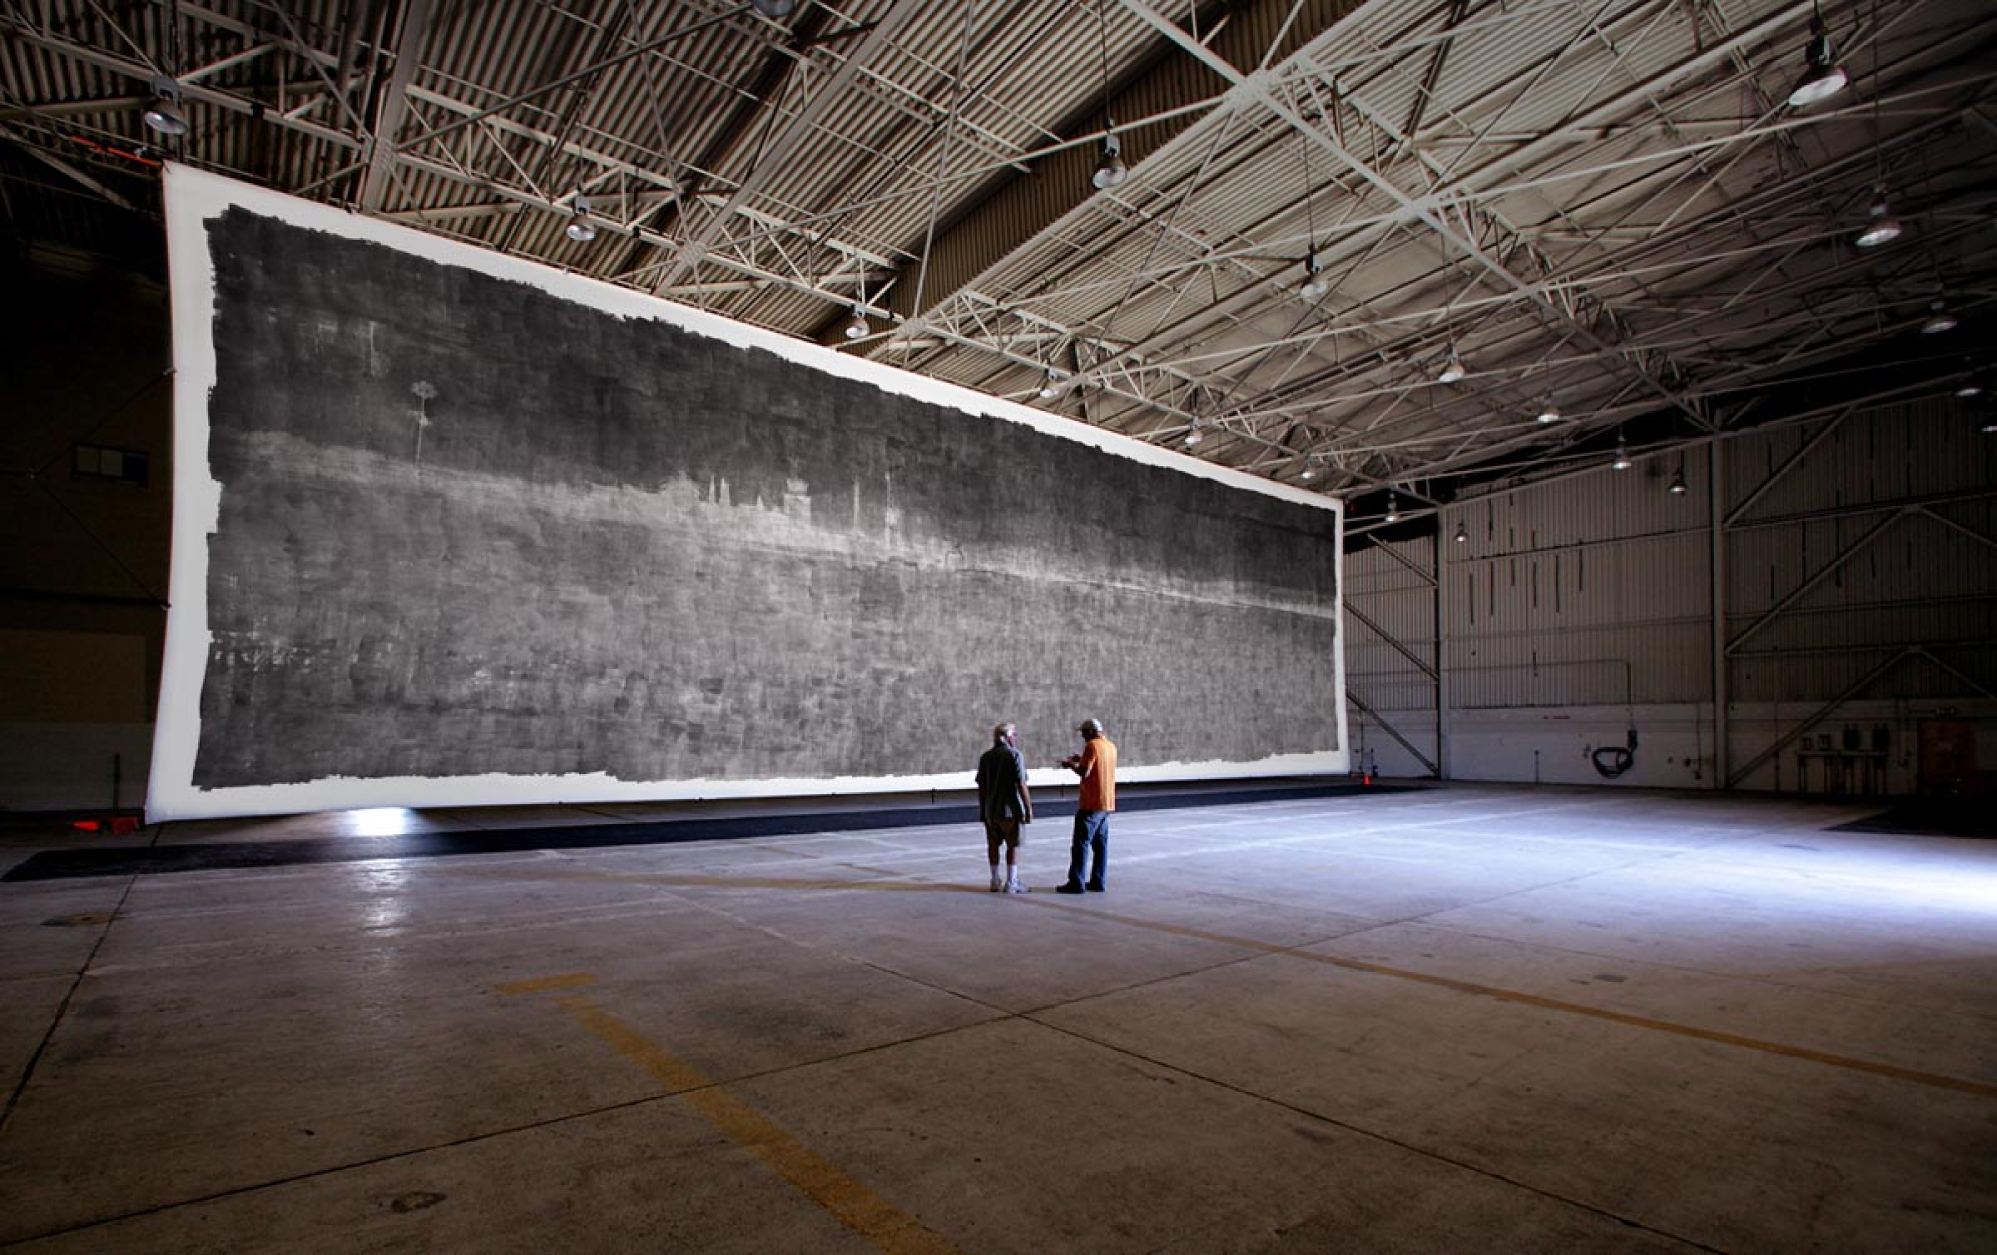 OC Art Blog | The Great Picture: The World’s Largest Photograph and The